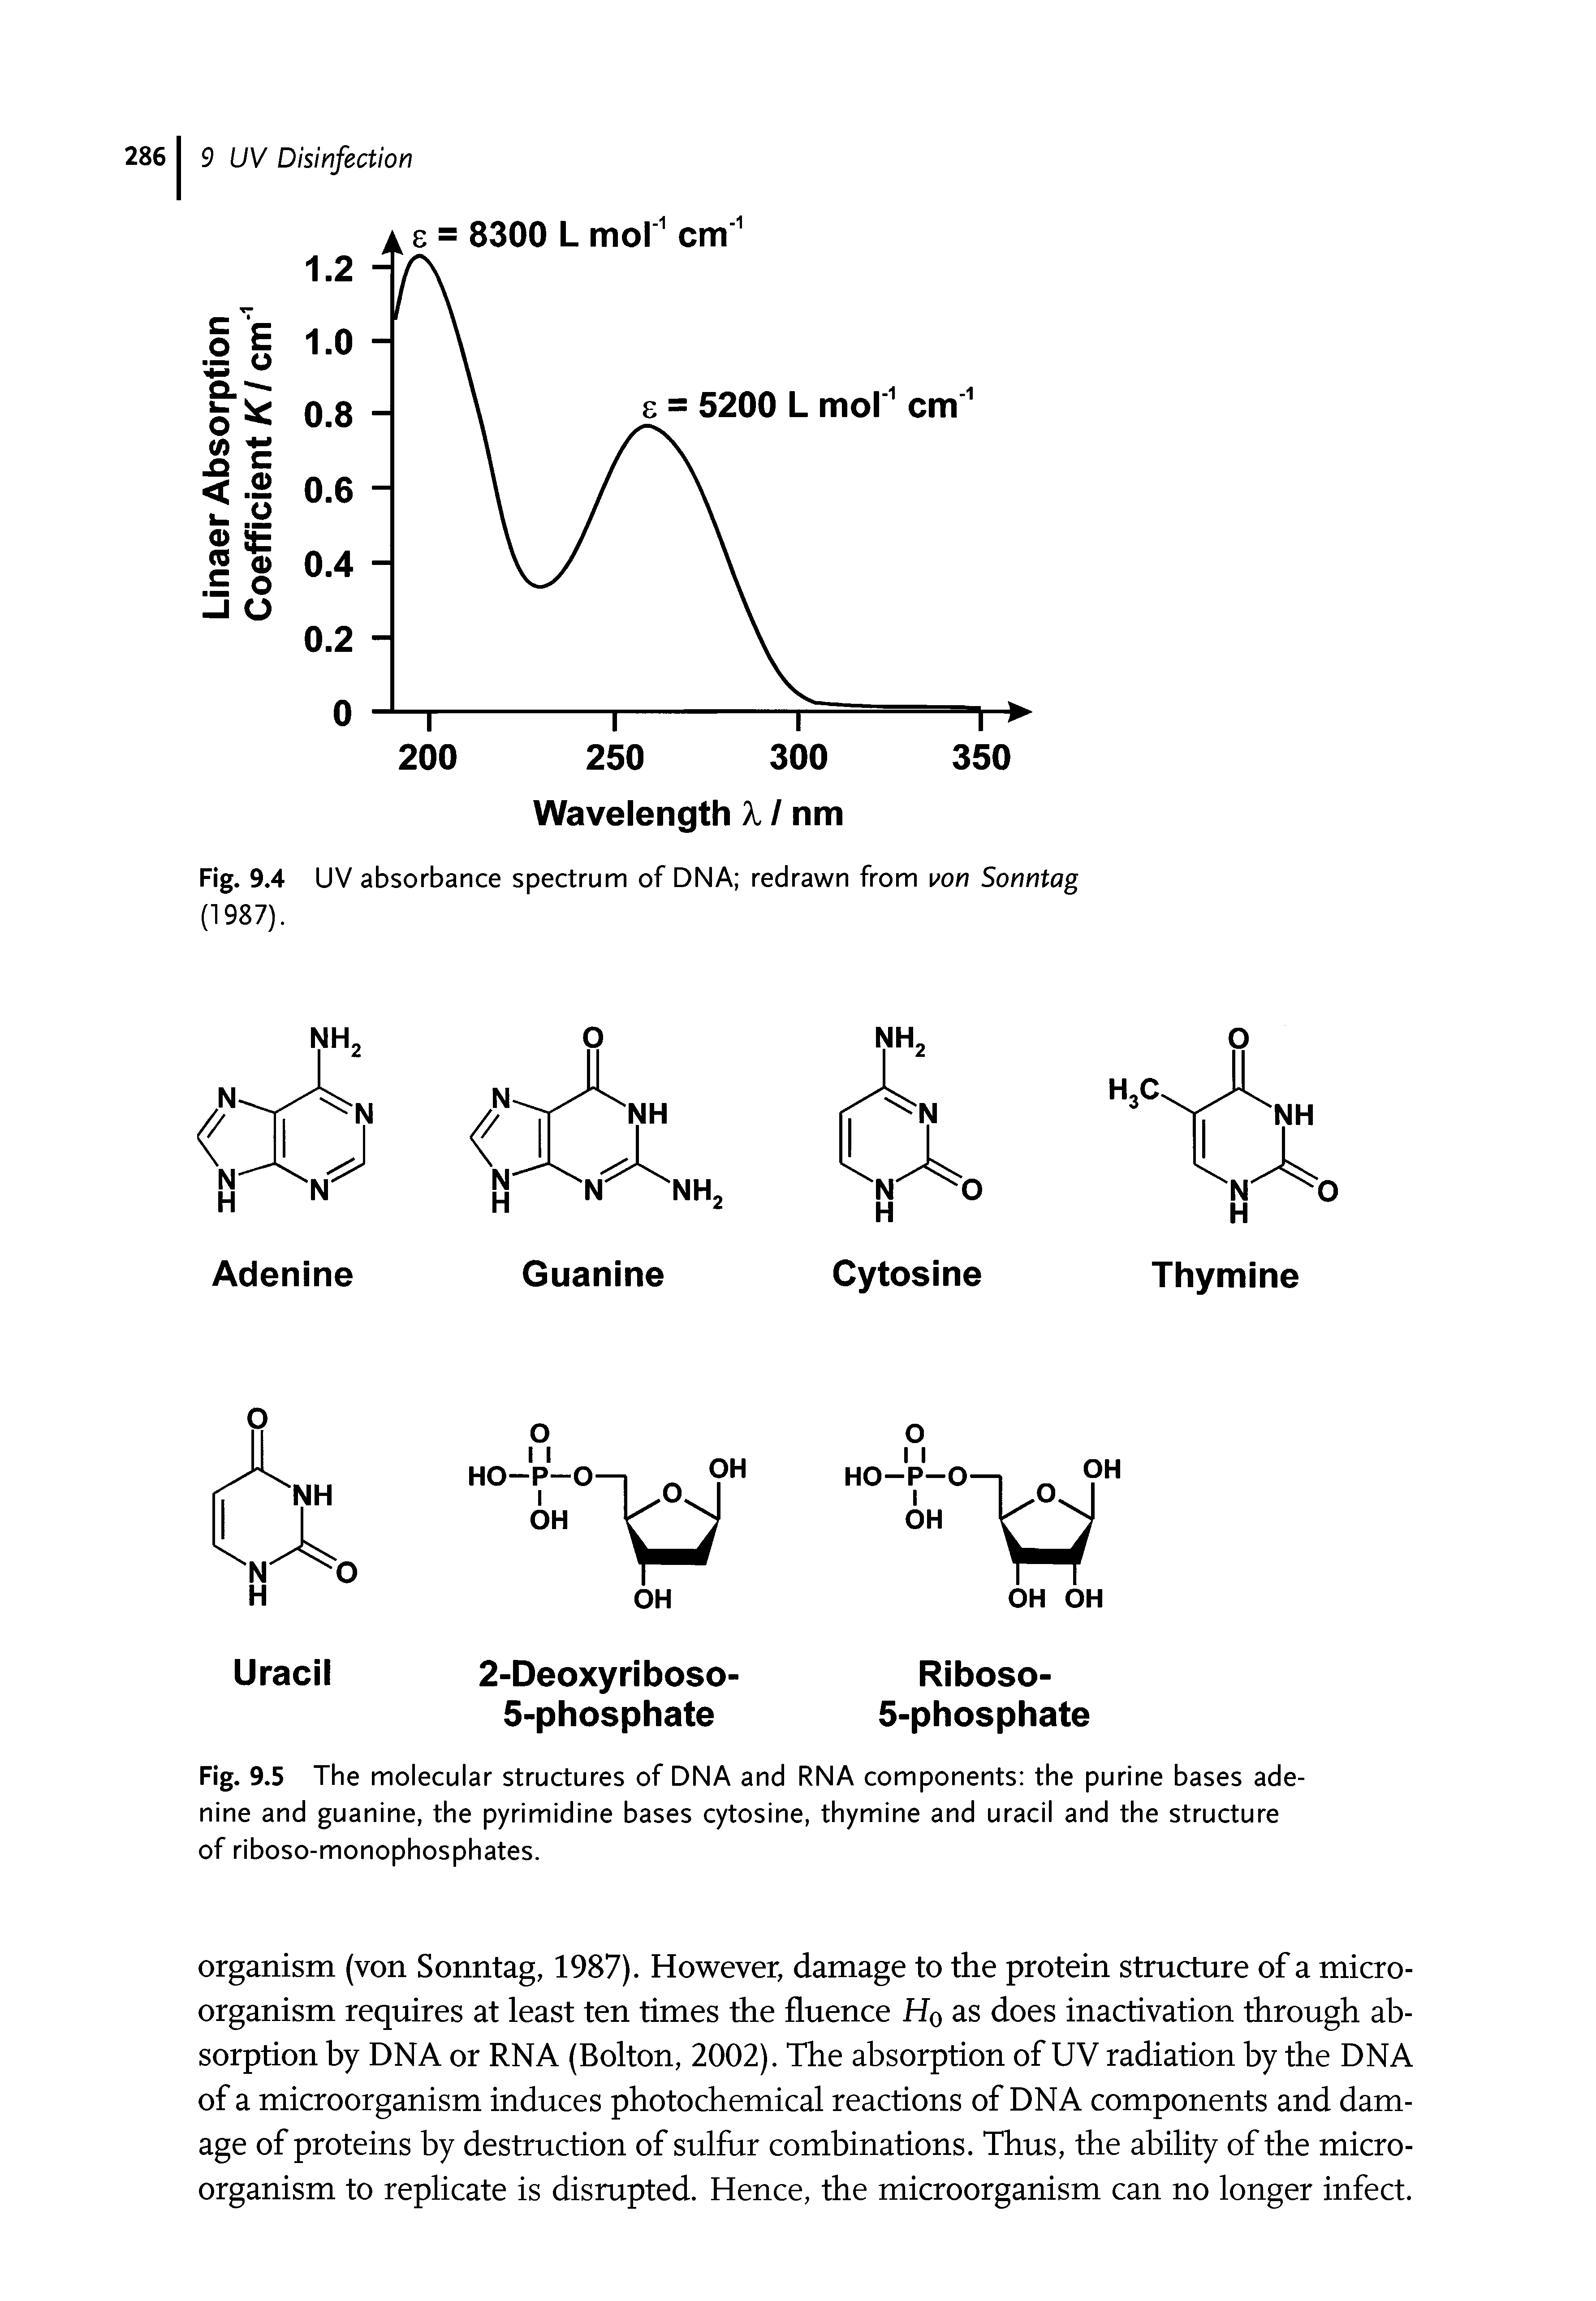 Fig. 9.5 The molecular structures of DNA and RNA components the purine bases adenine and guanine, the pyrimidine bases cytosine, thymine and uracil and the structure of riboso-monophosphates.